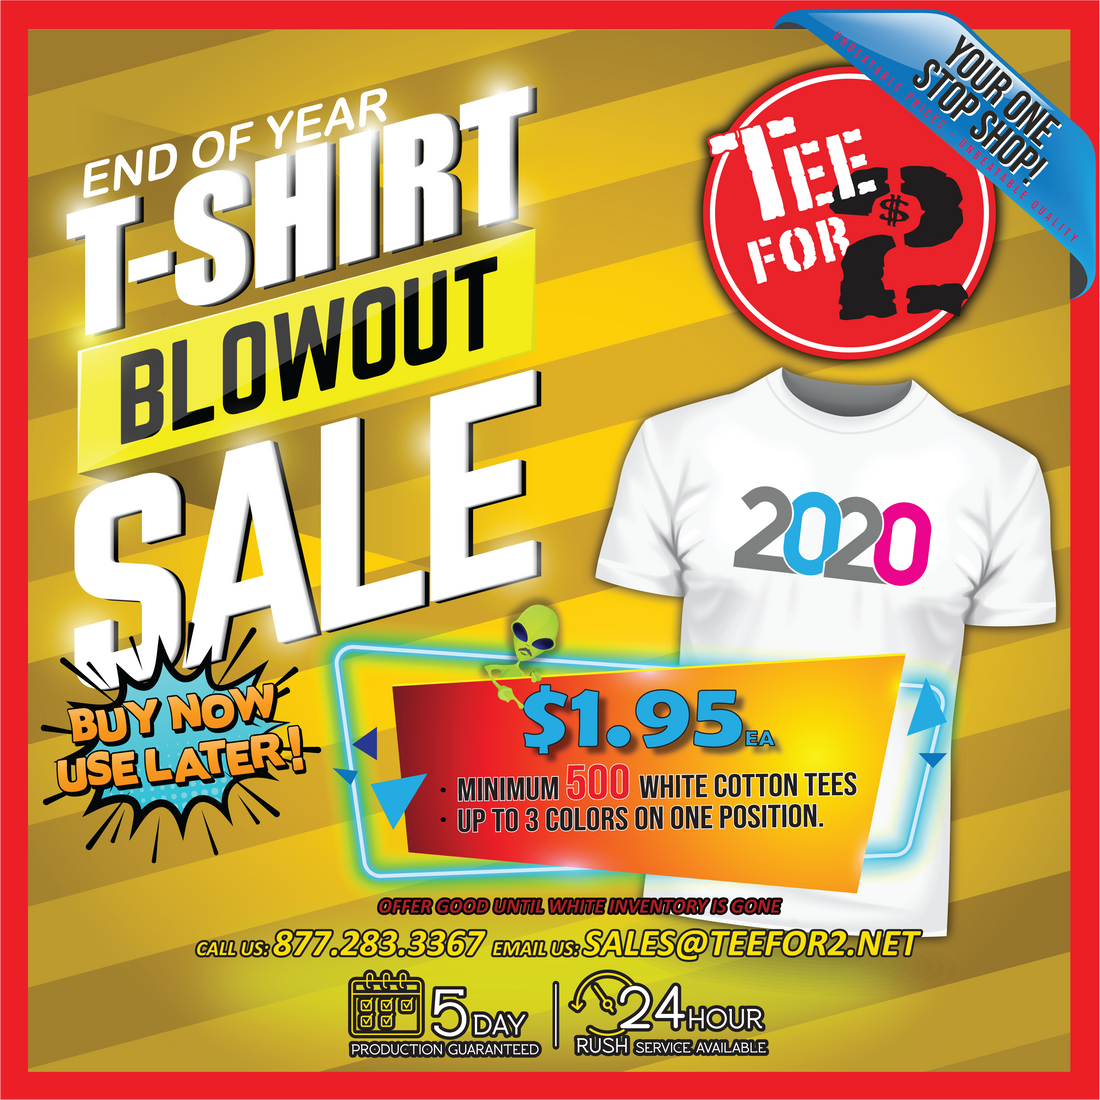 T-Shirt Blowout Sale - EXPIRED